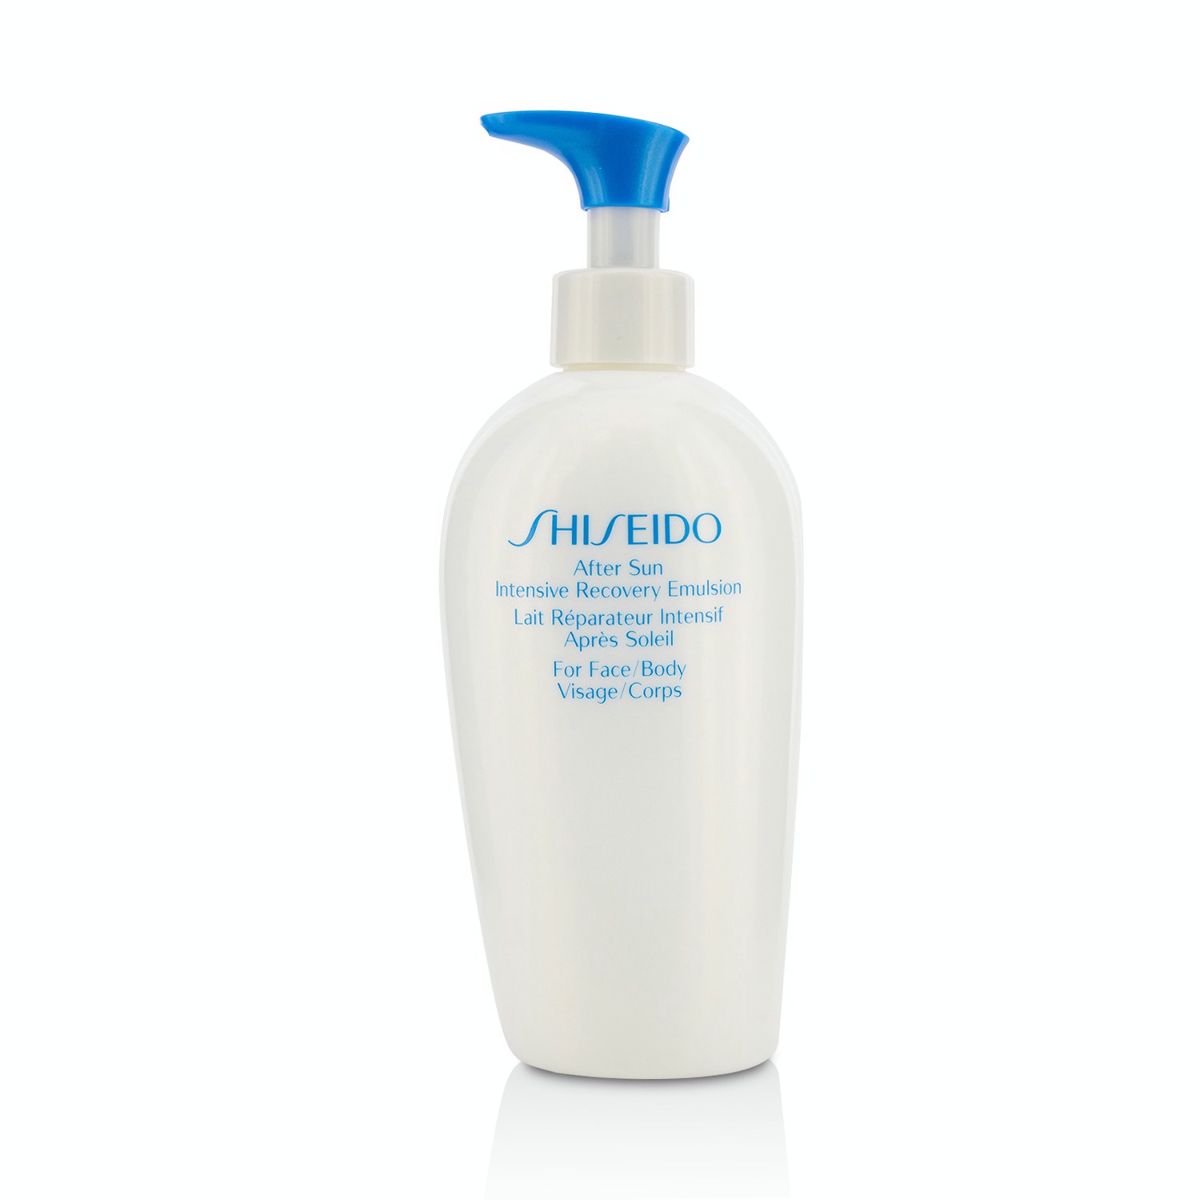 After Sun Intensive Recovery Emulsion (Unboxed) Shiseido Image